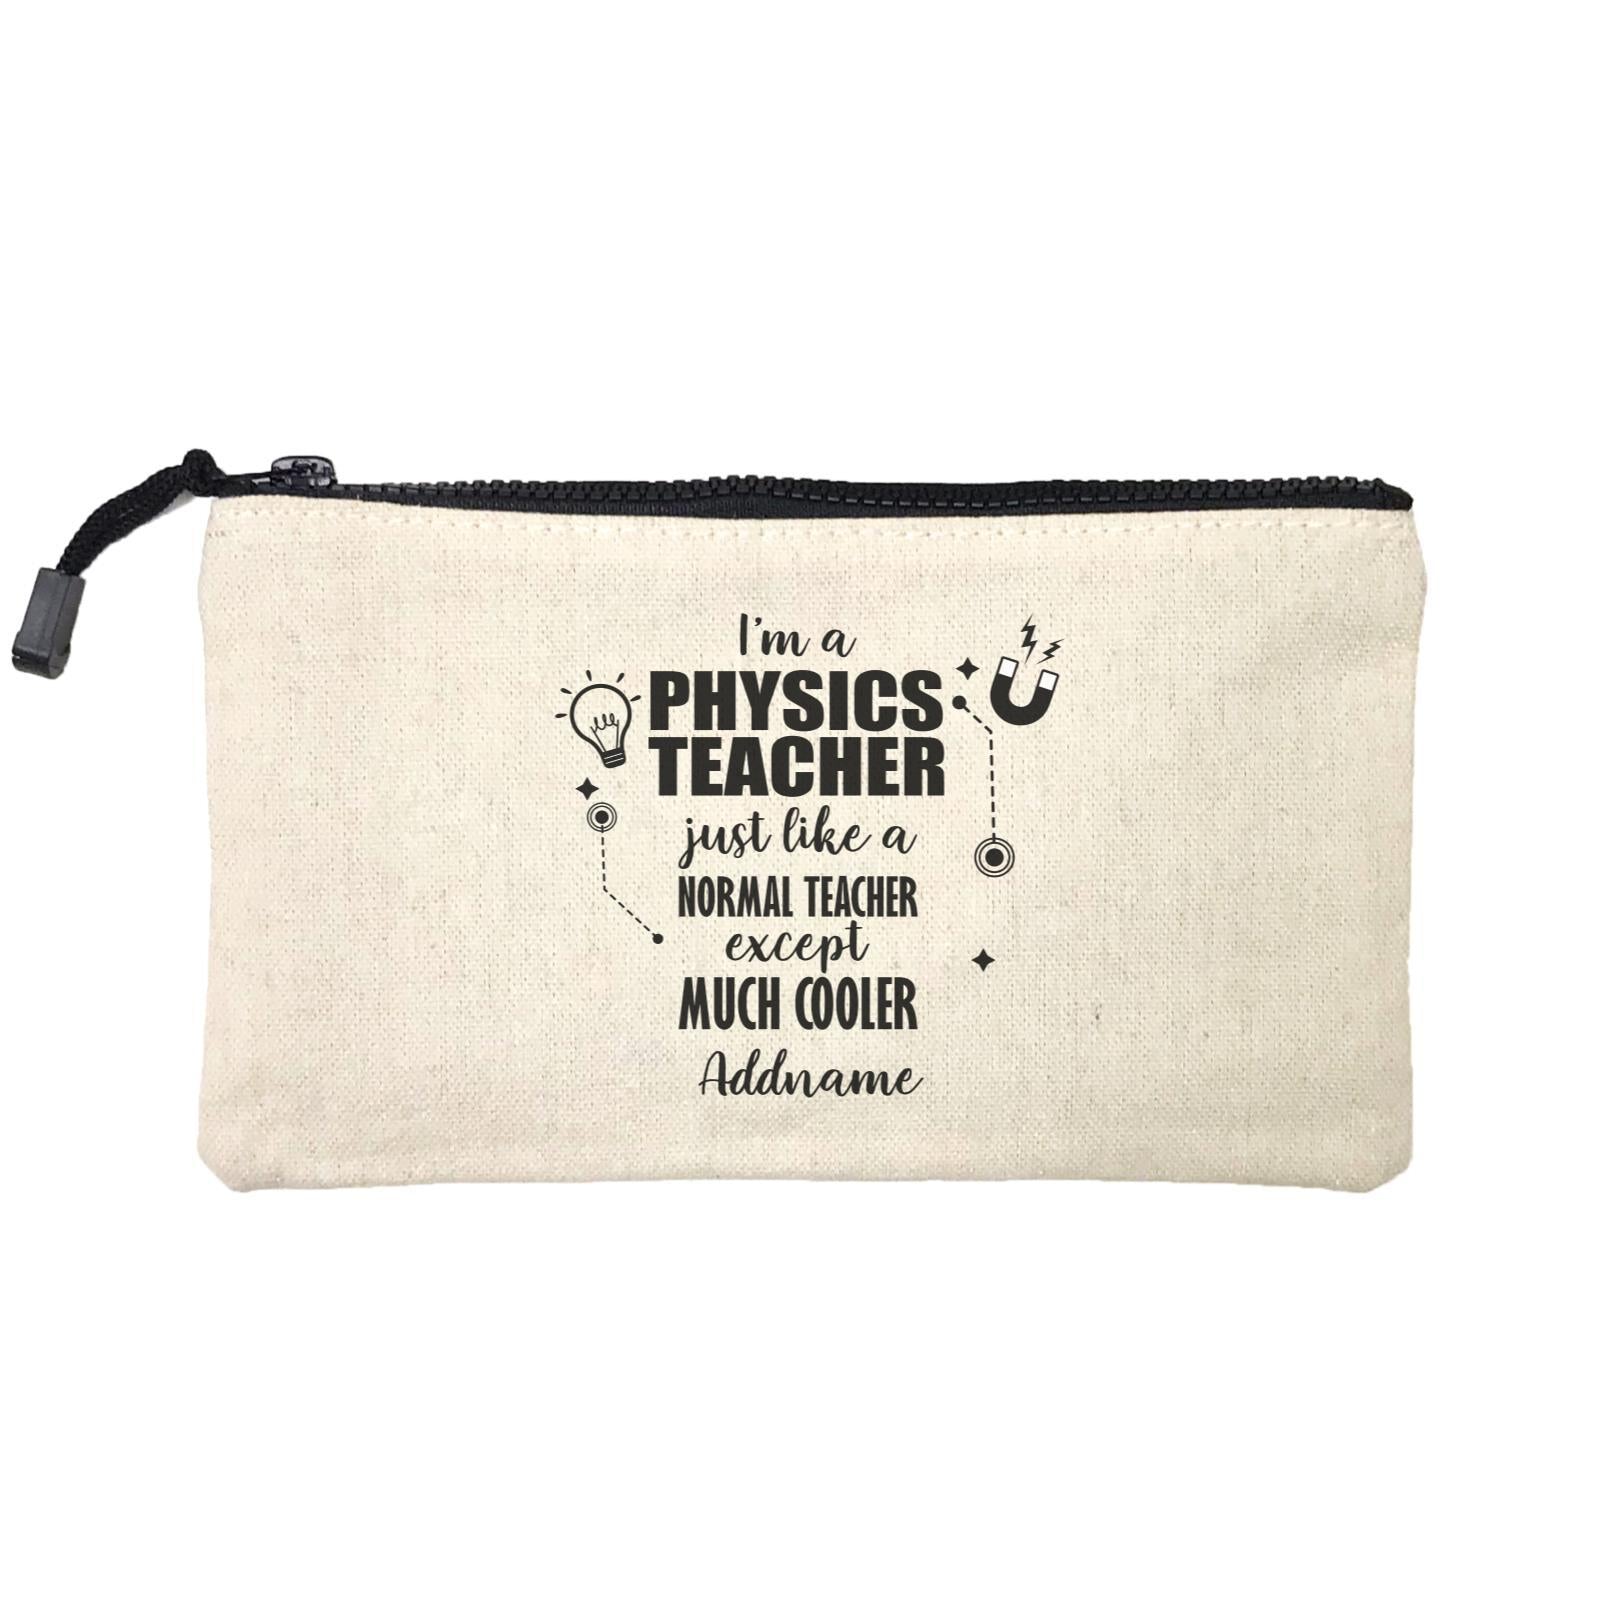 Subject Teachers 2 I'm A Physics Teacher Addname Mini Accessories Stationery Pouch